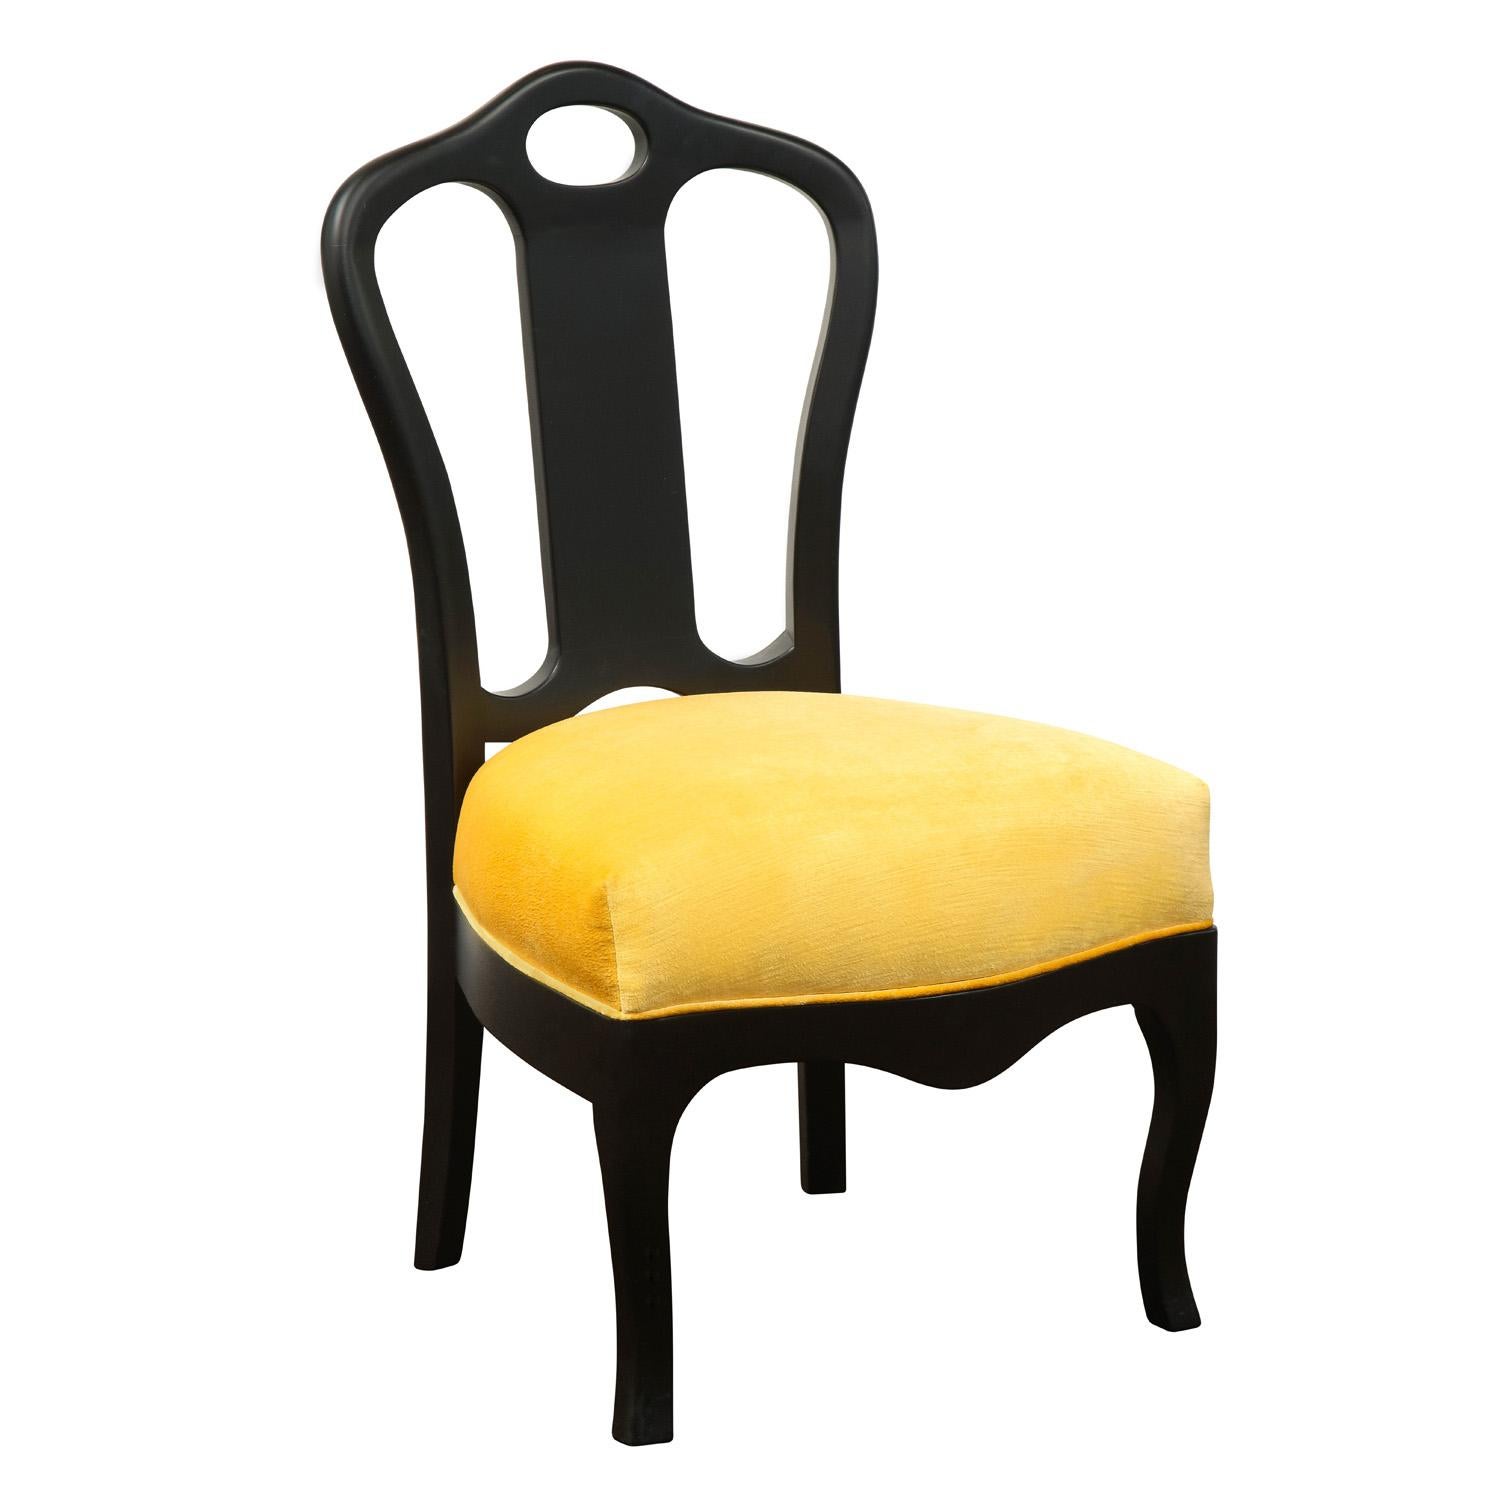 Chic pull up chair in ebonized mahogany with seat newly upholstered in yellow velvet by Van Day Truex in partnership with Harry Hinson, American 1978. This timeless chair is the perfect accent for any room.